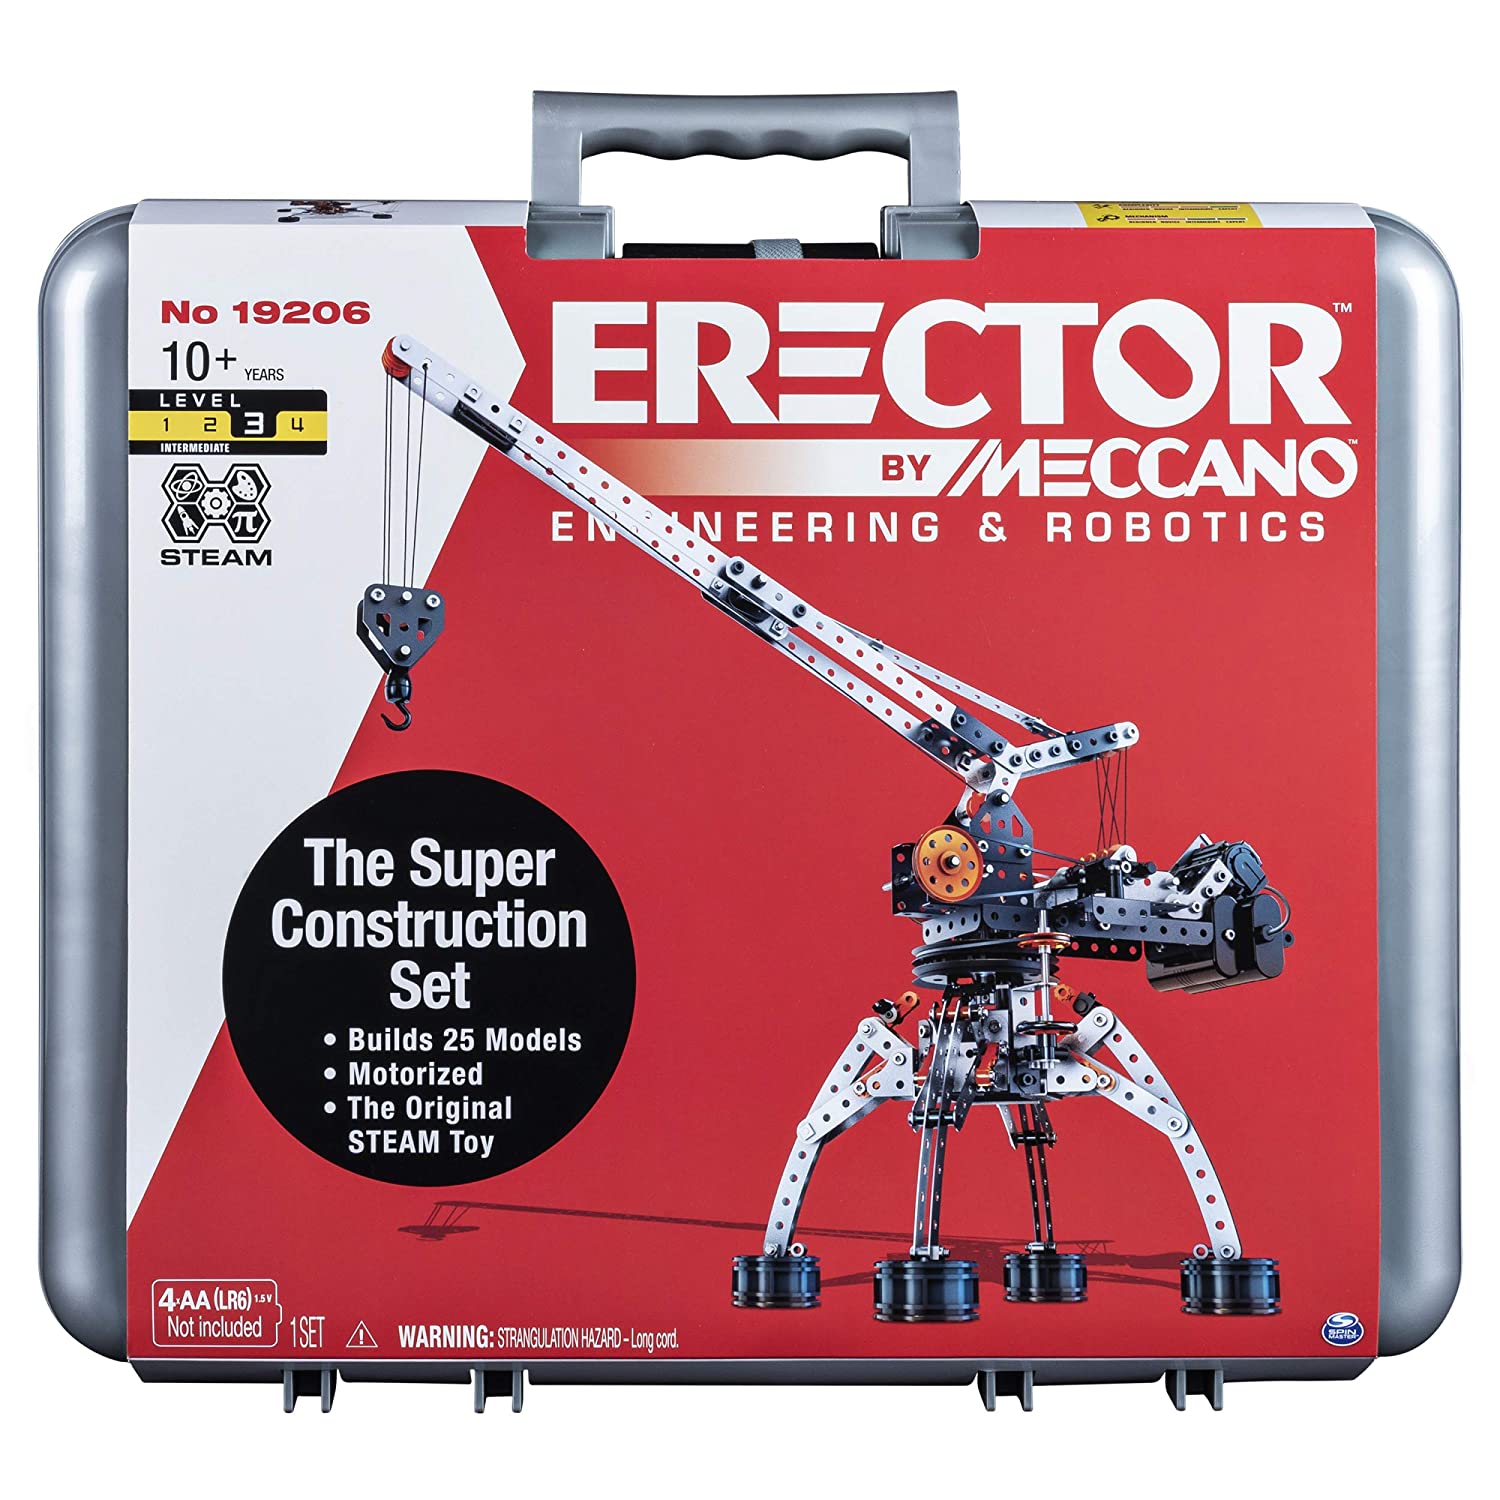 Erector by Meccano Super Construction 25-In-1 Motorized Building Set, Steam Education Toy